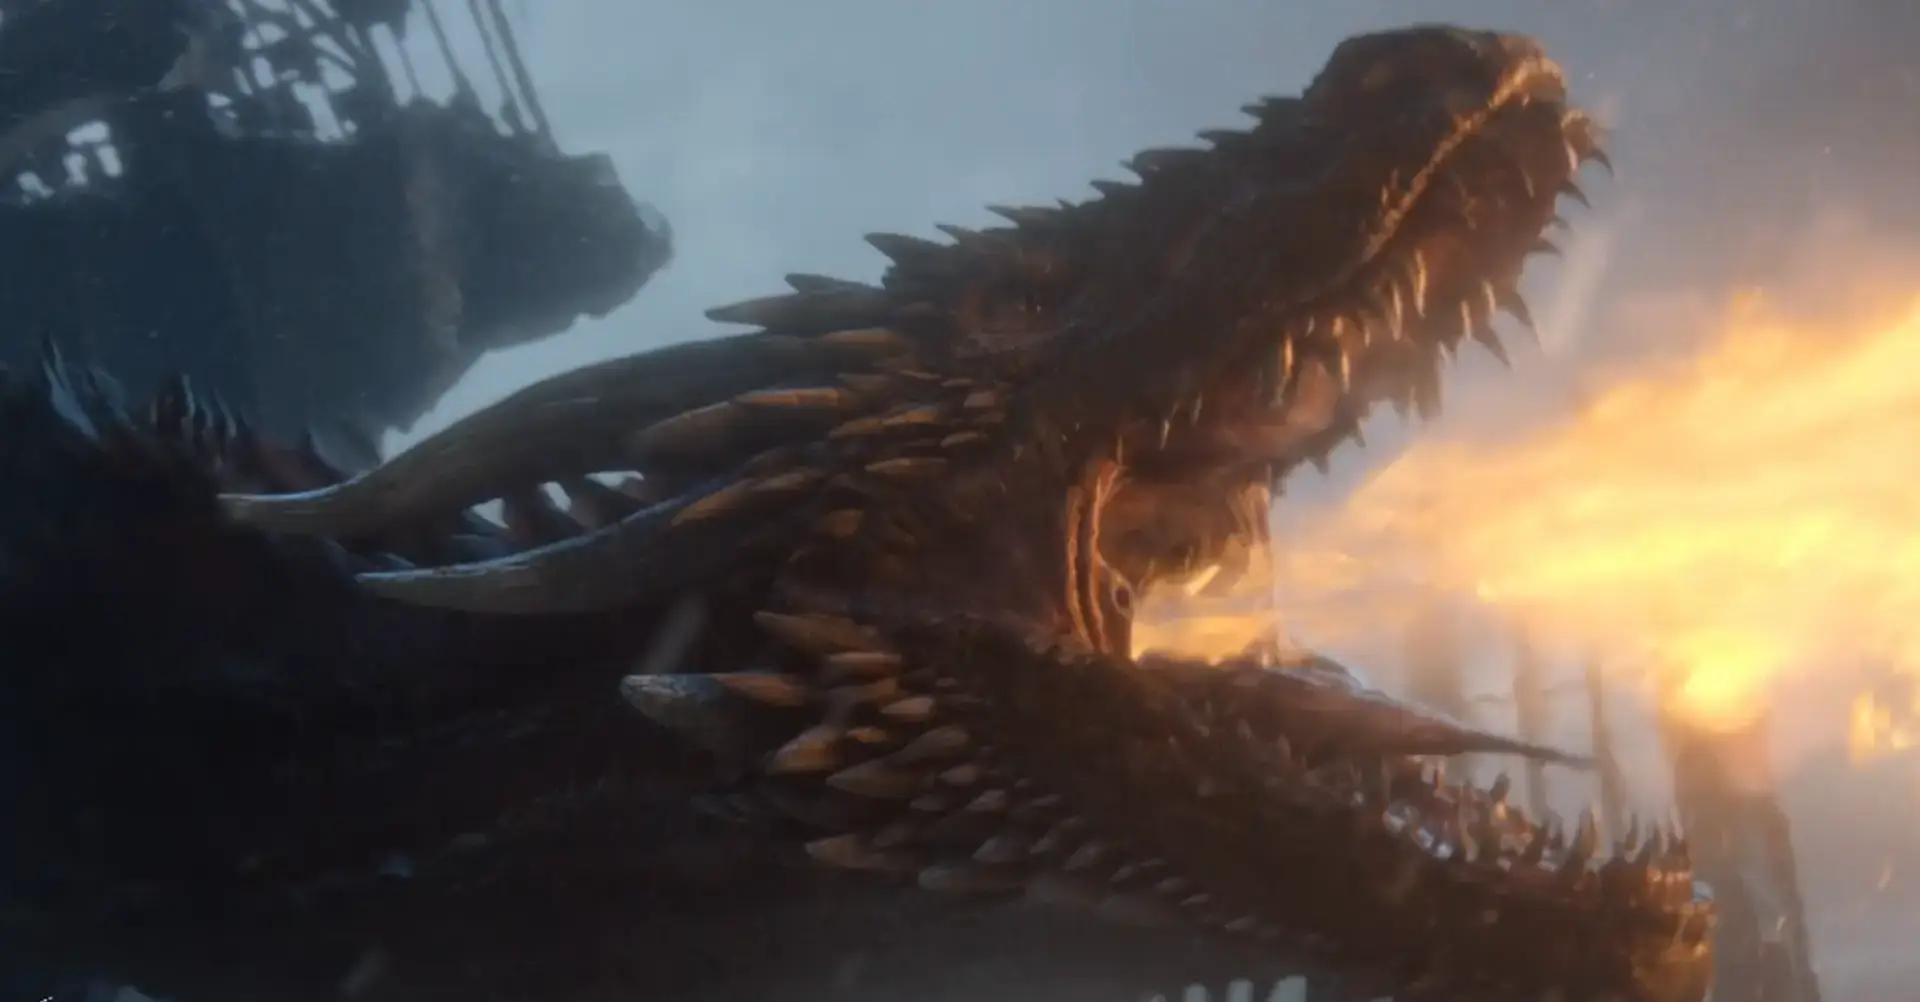 A large dragon exhaling fire from its mouth amidst a smoky, dimly lit background, perfectly encapsulating the HBO brand story.